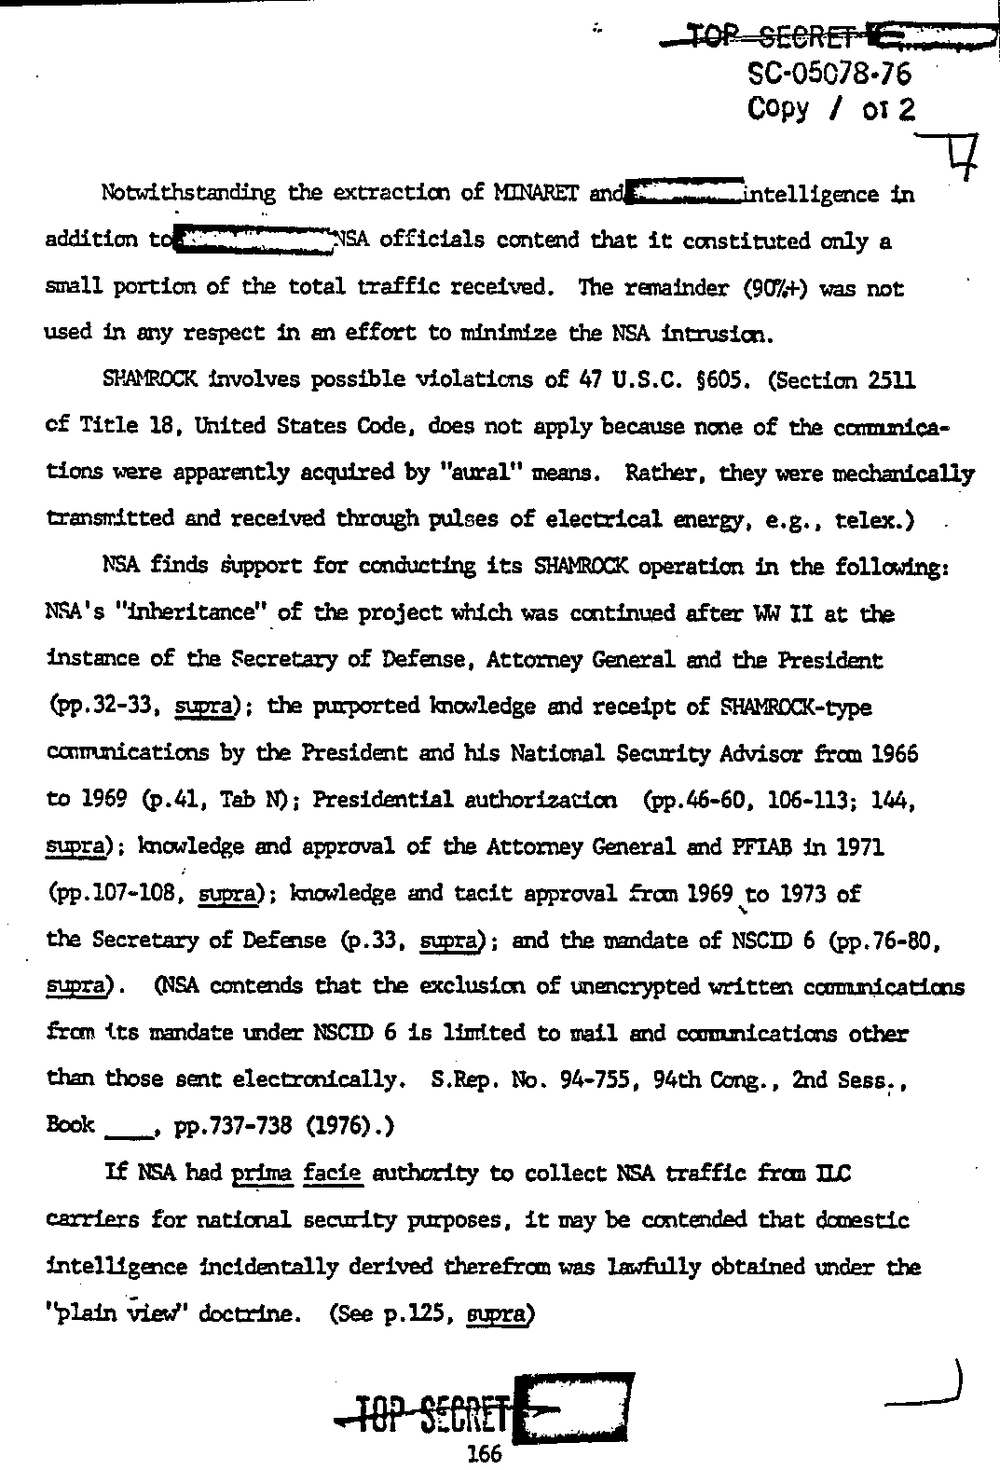 Page 174 from Report on Inquiry Into CIA Related Electronic Surveillance Activities